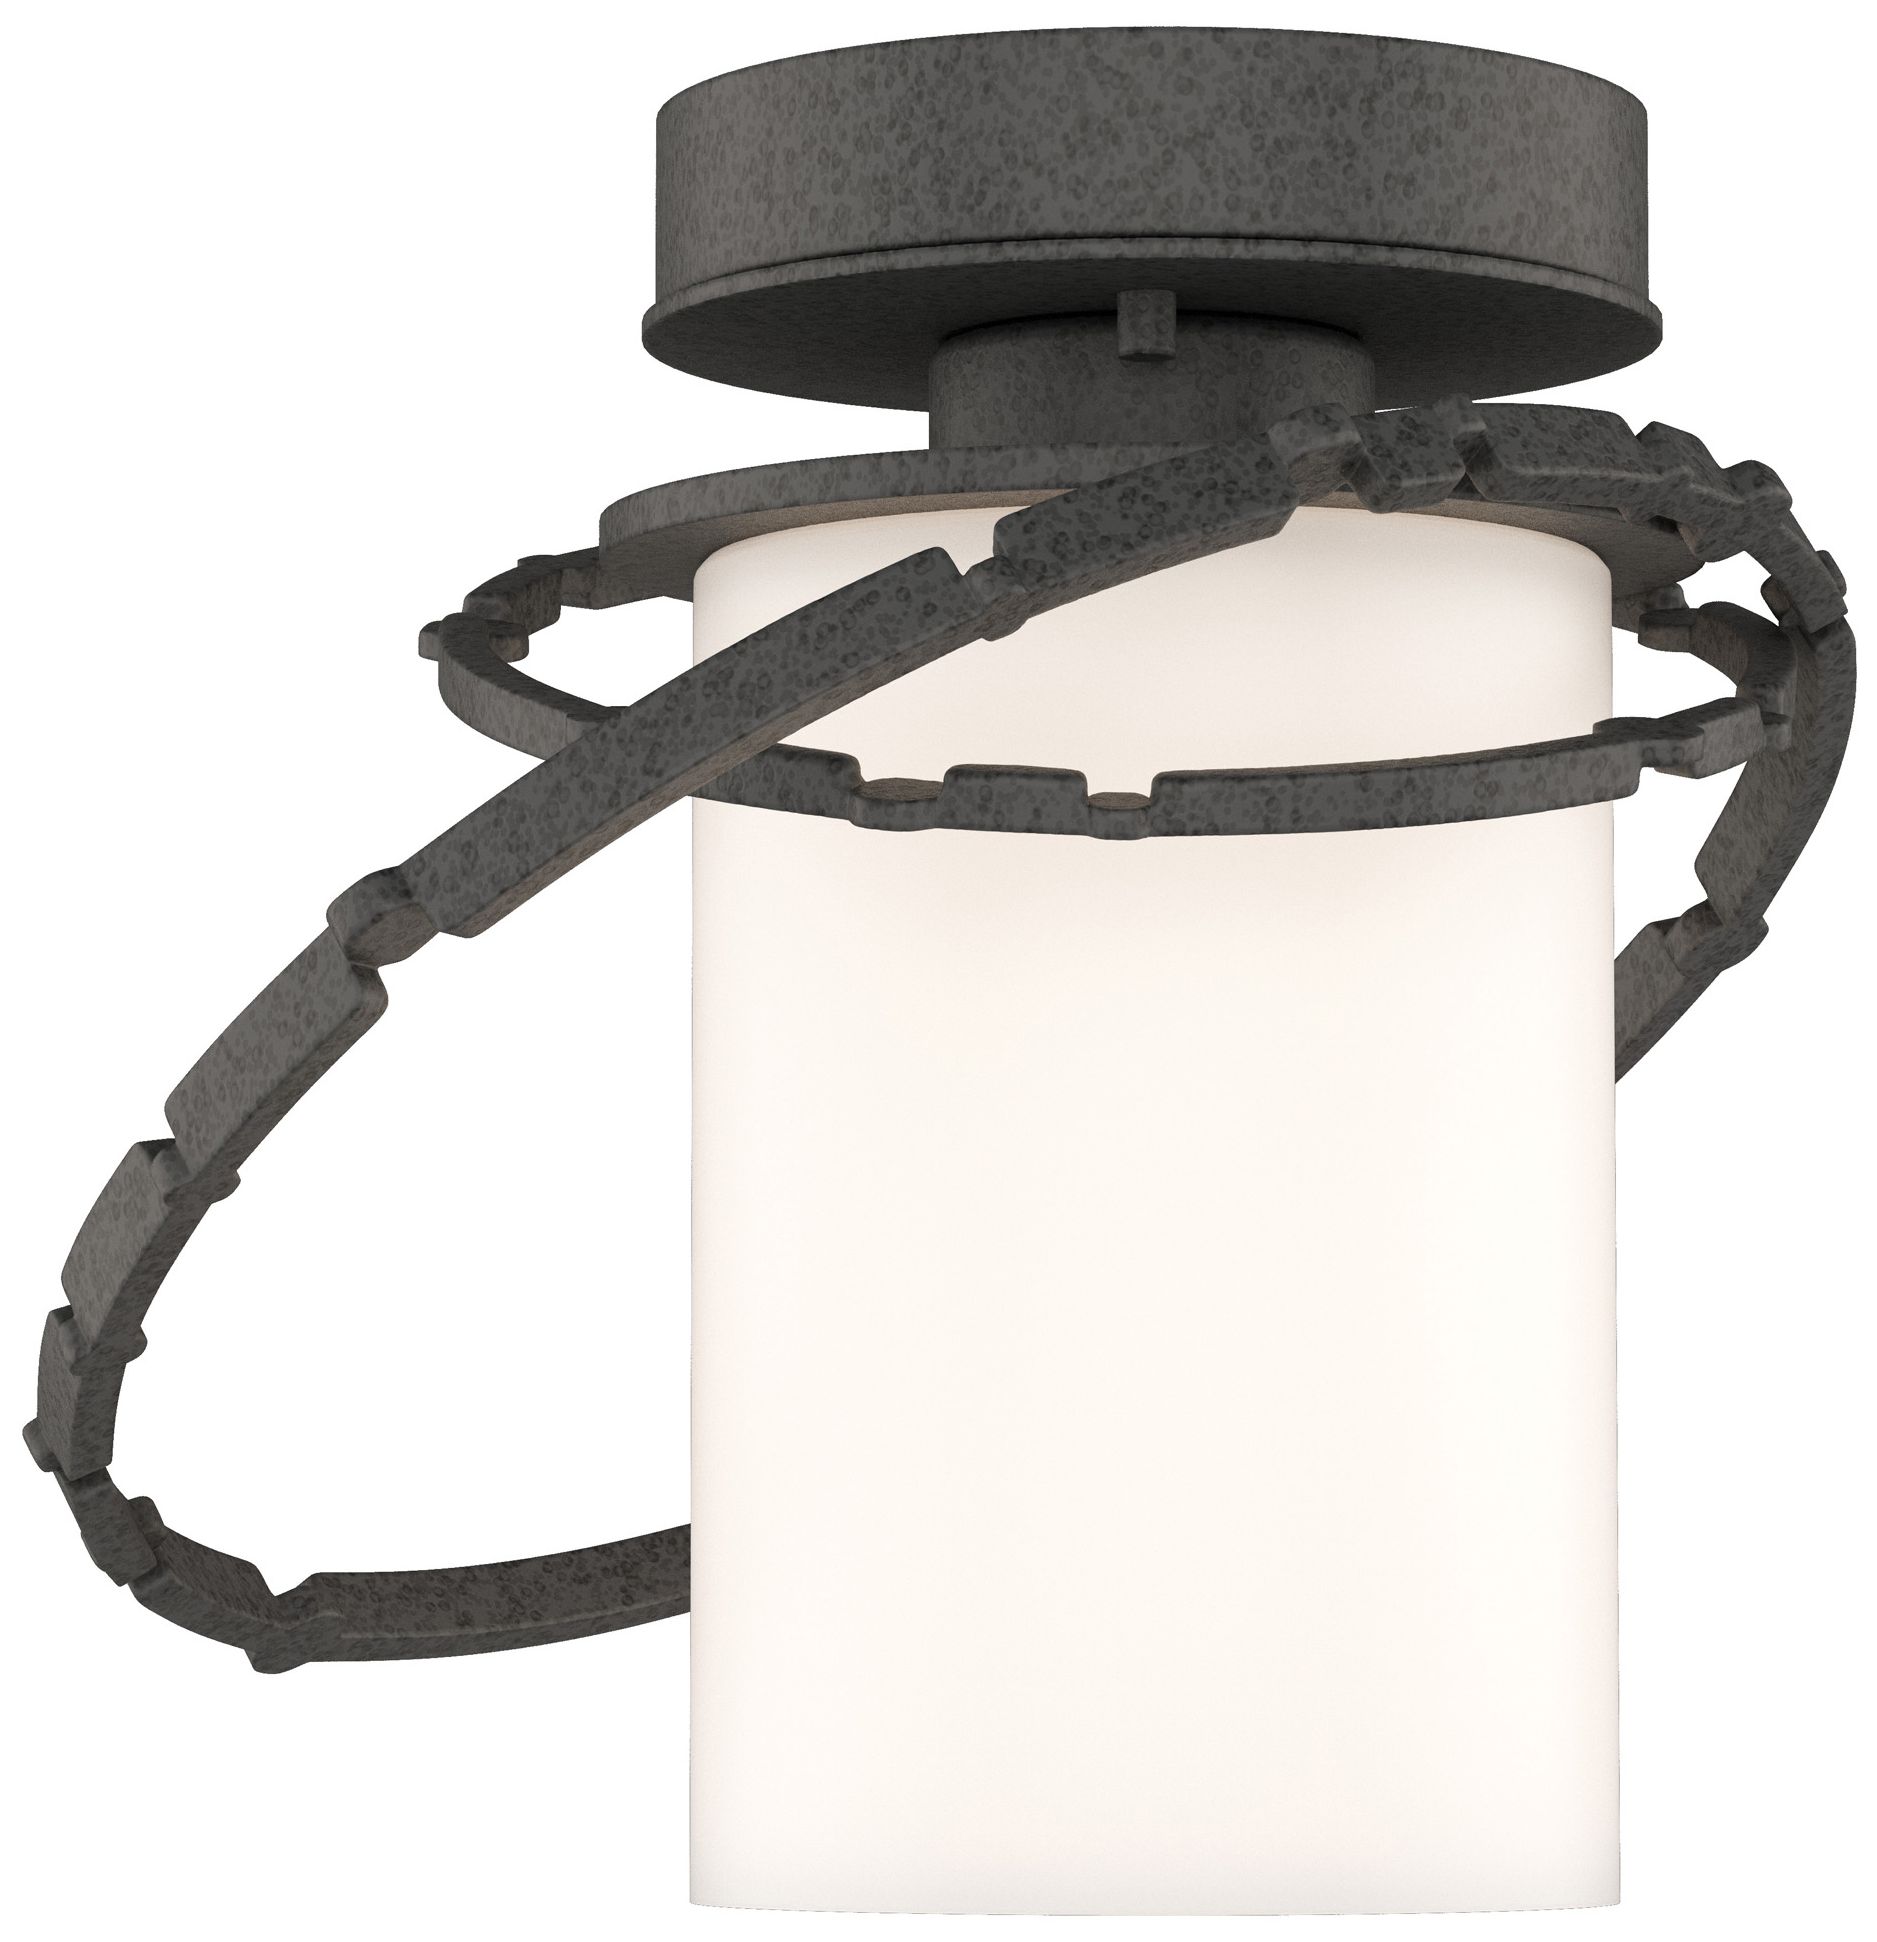 Olympus Coastal Natural Iron Outdoor Semi-Flush With Opal Glass